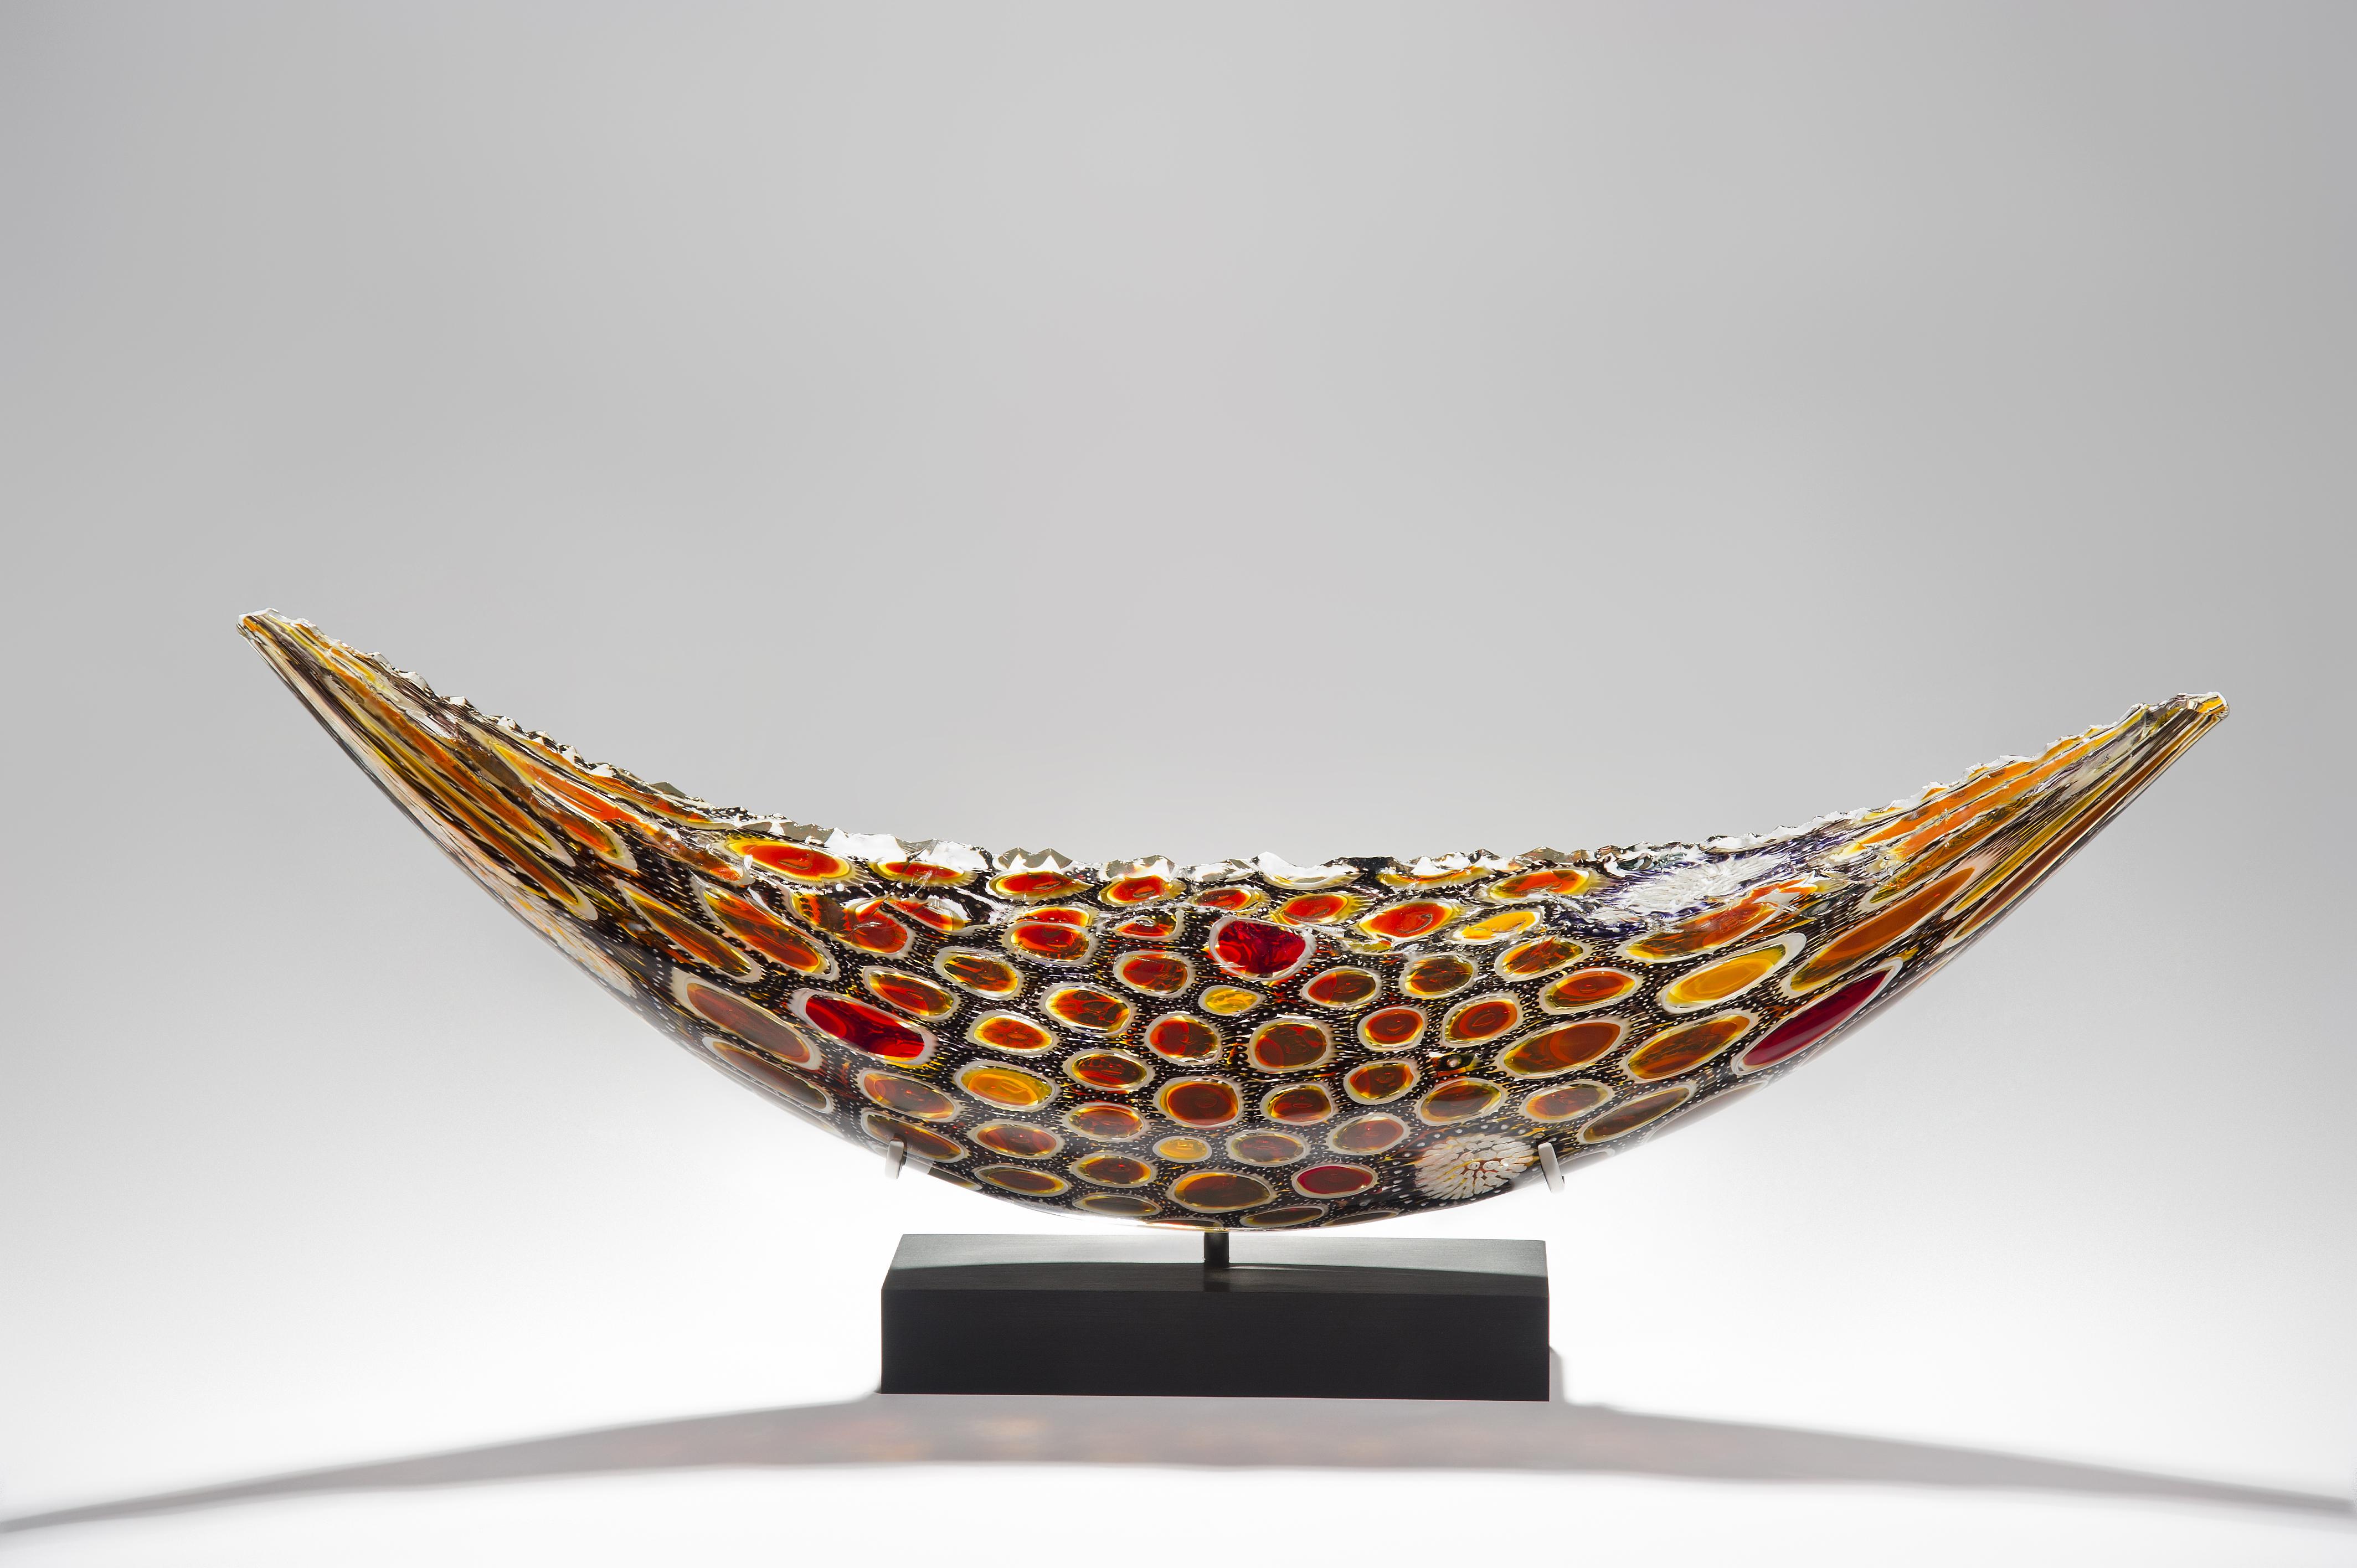 Midnight Quillon is a unique solid glass sculpture made in collaboration between the British artist James Devereux and the American artist David Patchen. Patchen's work is known for its intense colors, intricate detail and meticulous craftsmanship.